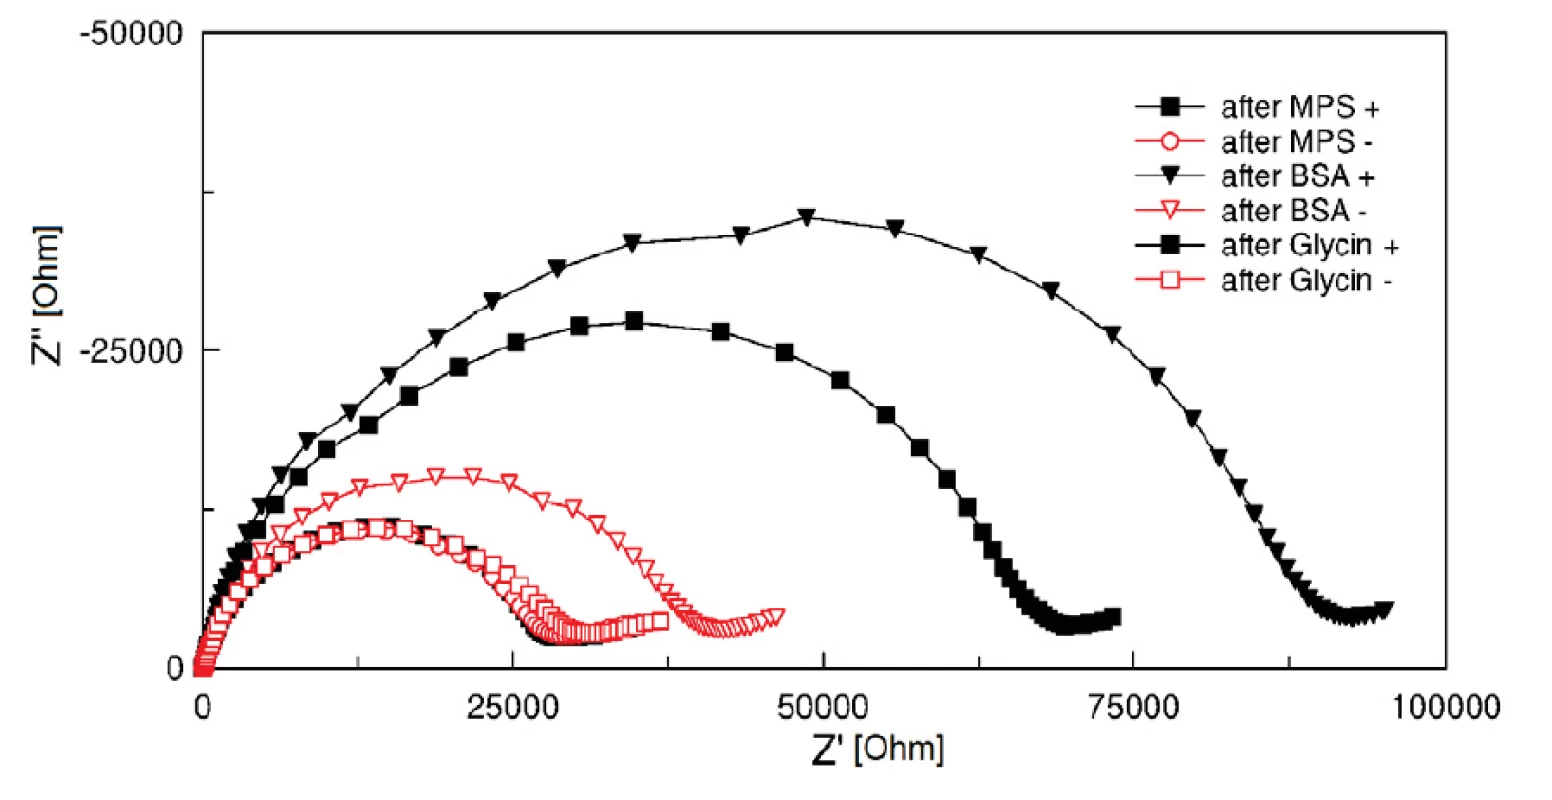 Cole-Cole plots (100 kHz and 1 Hz) of electrodes with EDC/NHS covalent coupling (+, filled points) and without EDC/NHS covalent coupling of BSA protein (-, hollow points).